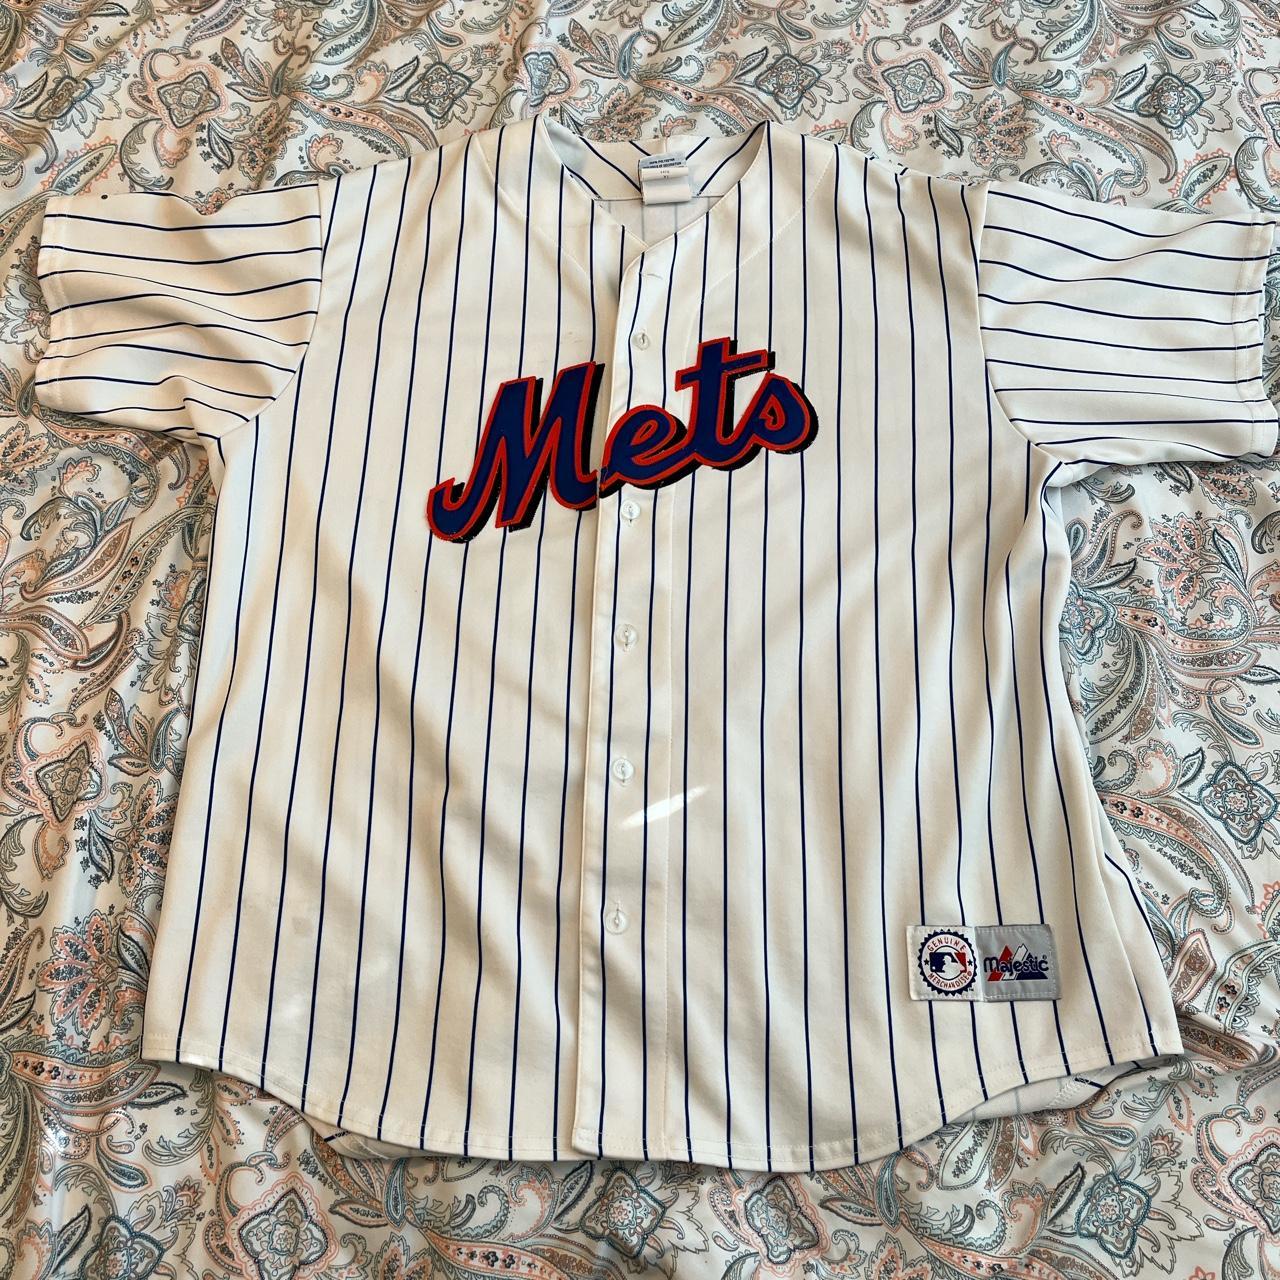 Mets 90s MLB Jersey with a few minor flaws as shown - Depop